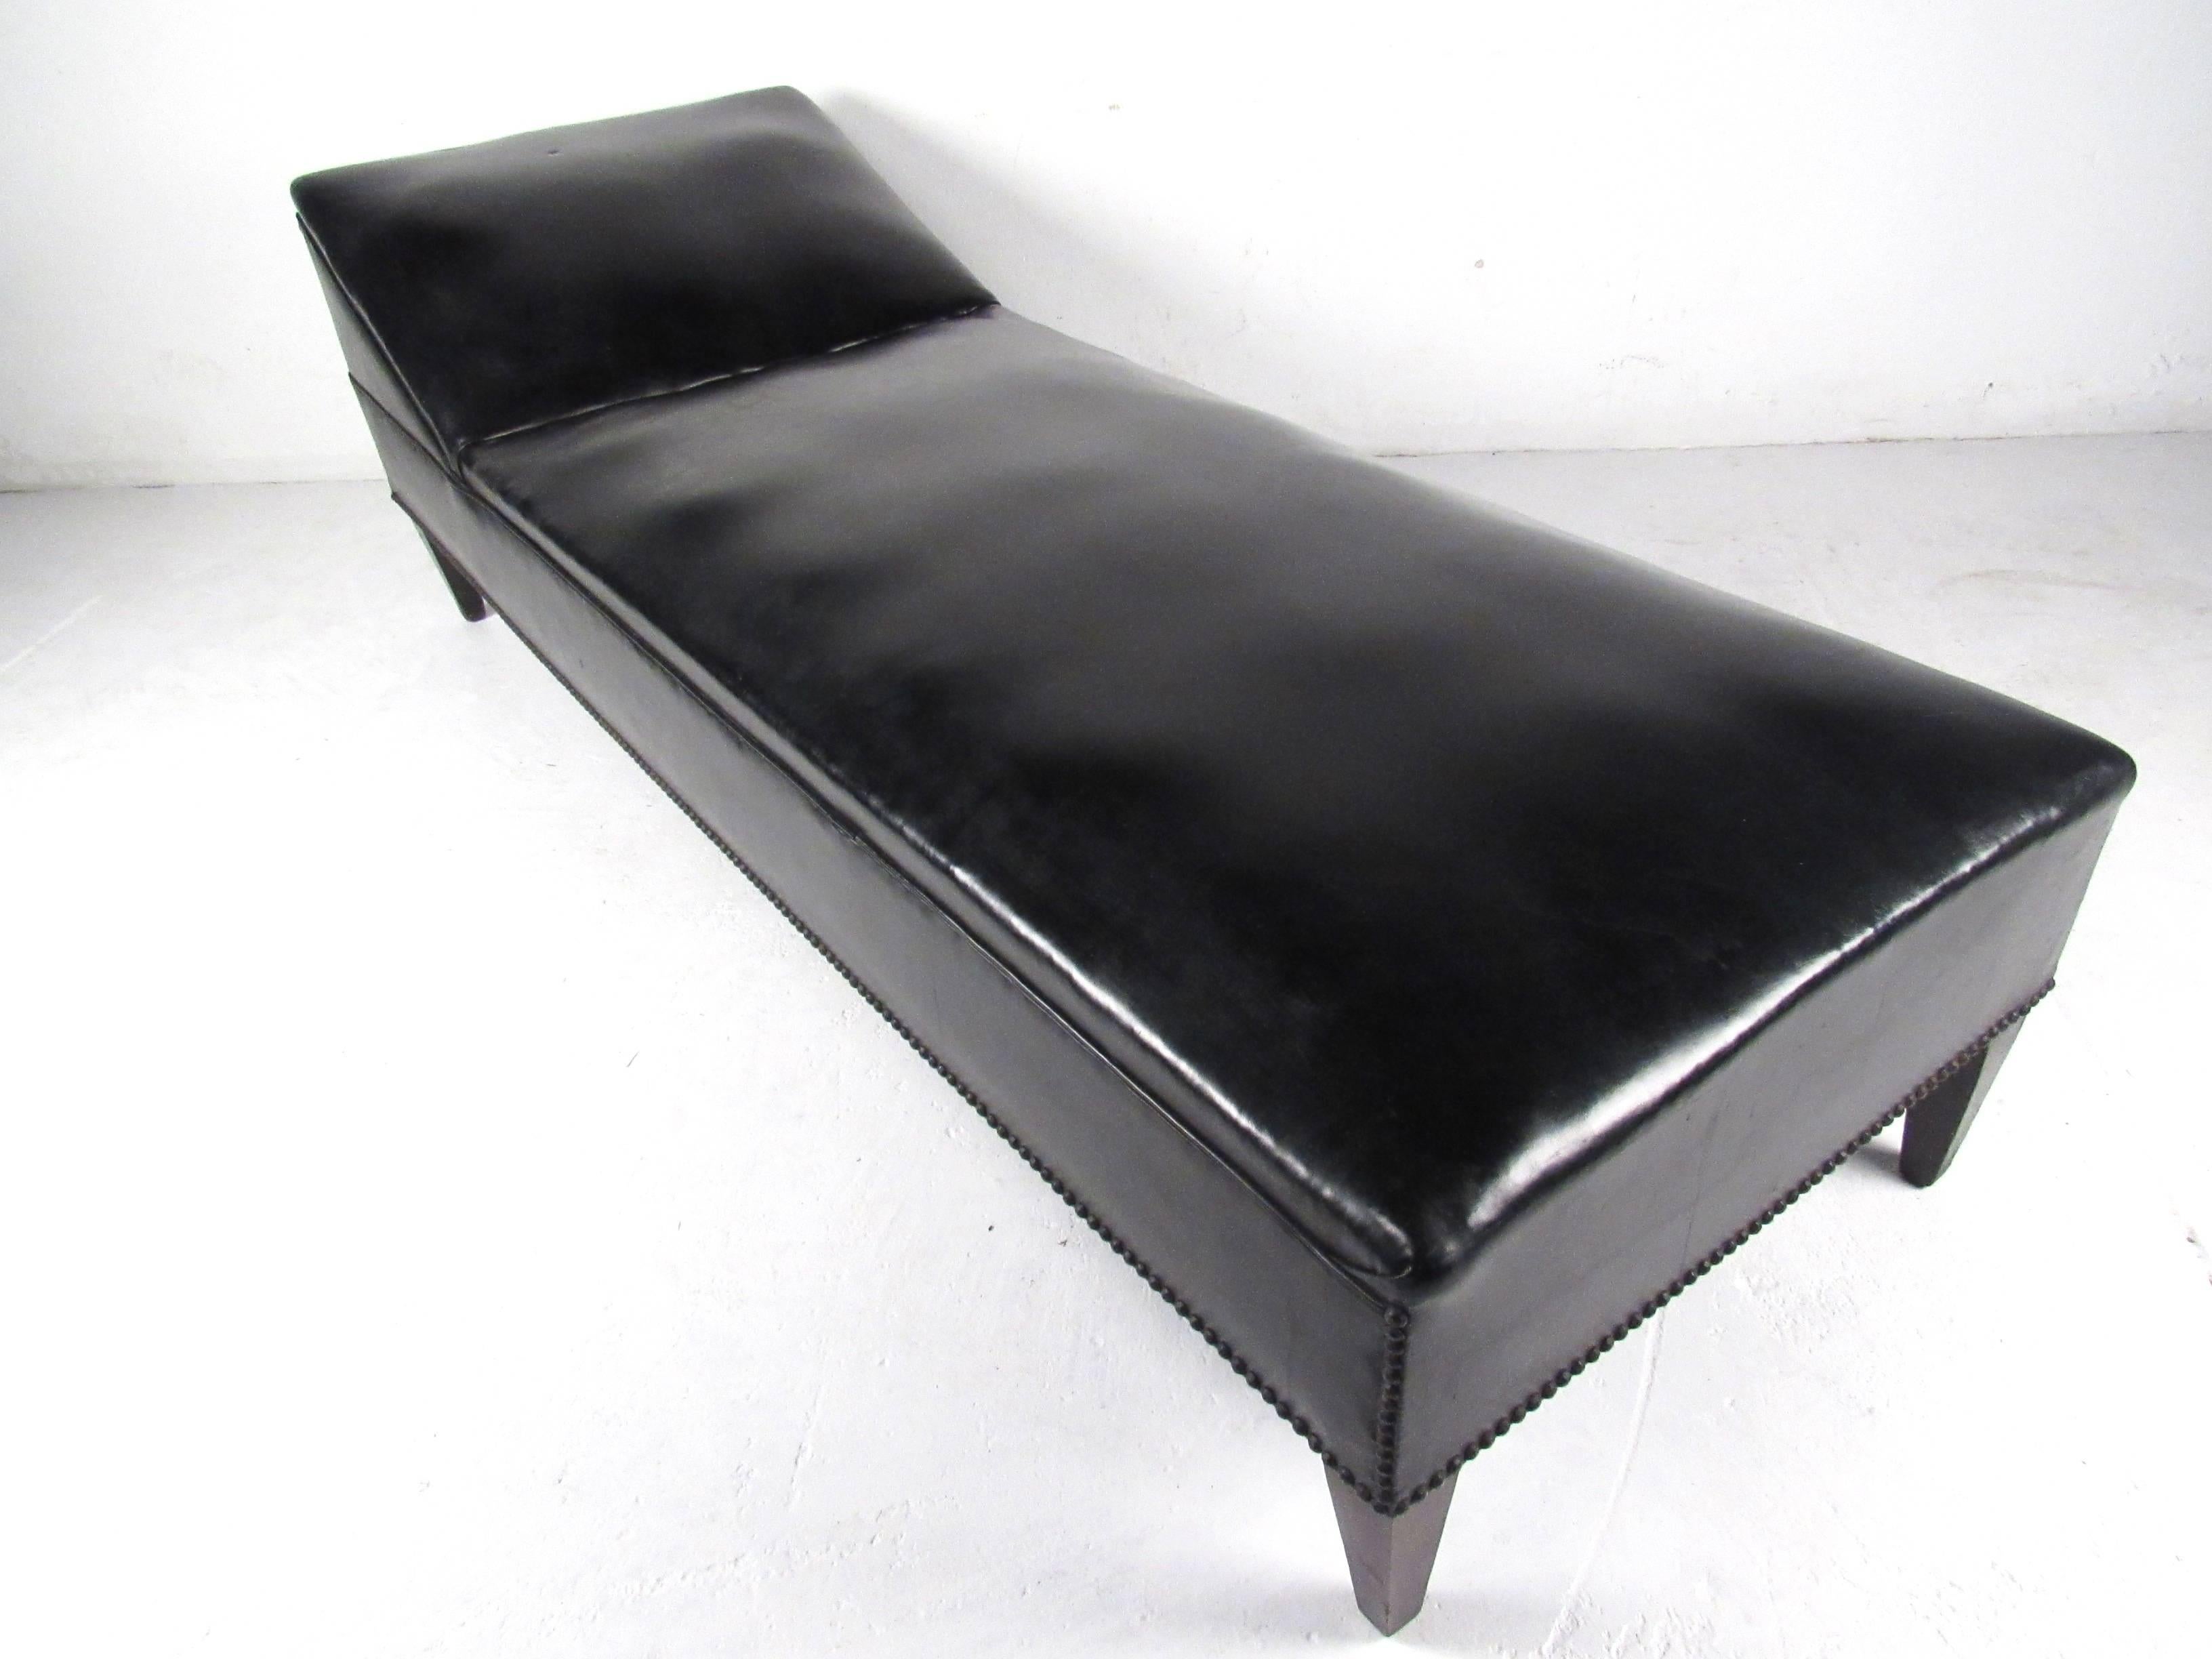 This beautiful black vinyl daybed features a vintage style designed for optimal comfort. The unique design of this piece makes an impressive and substantial addition to home or office. Please confirm location (NY or NJ).